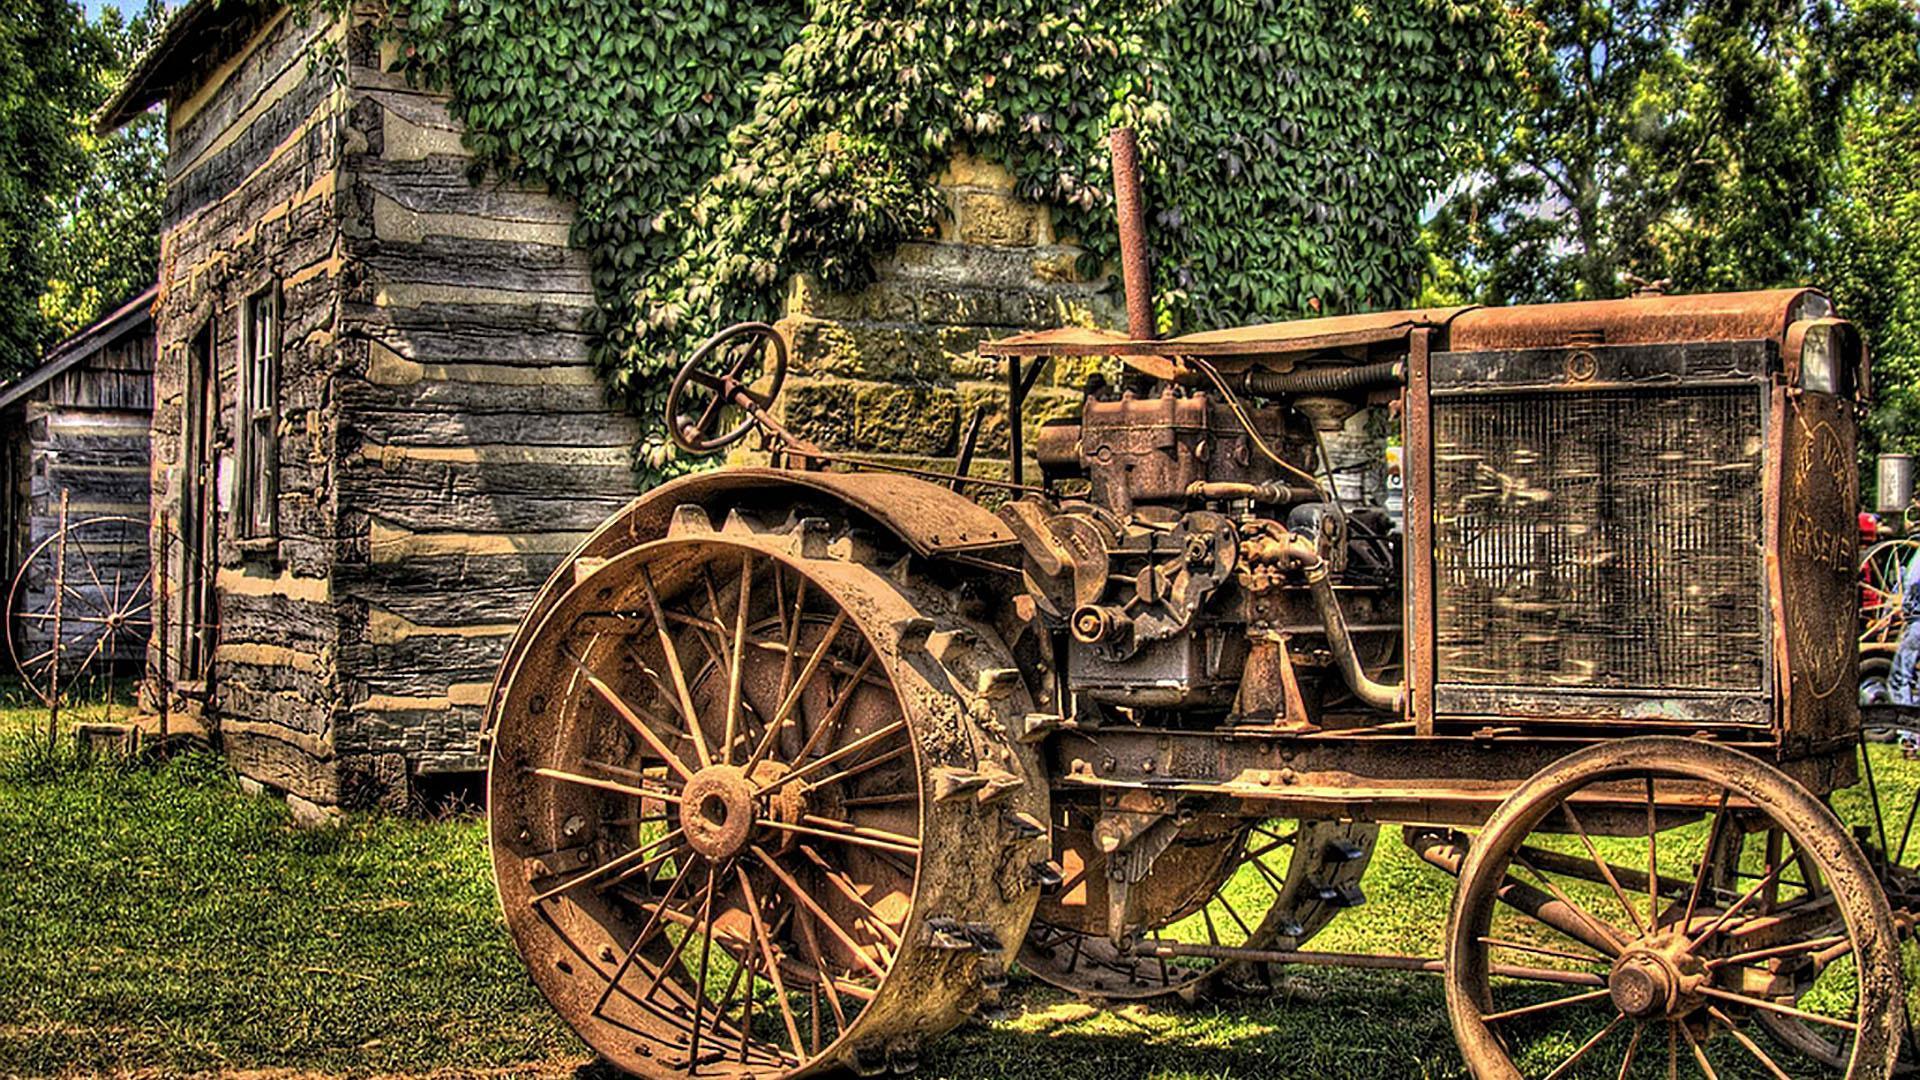 Vintage Tractor. HD Wallpaper for Android